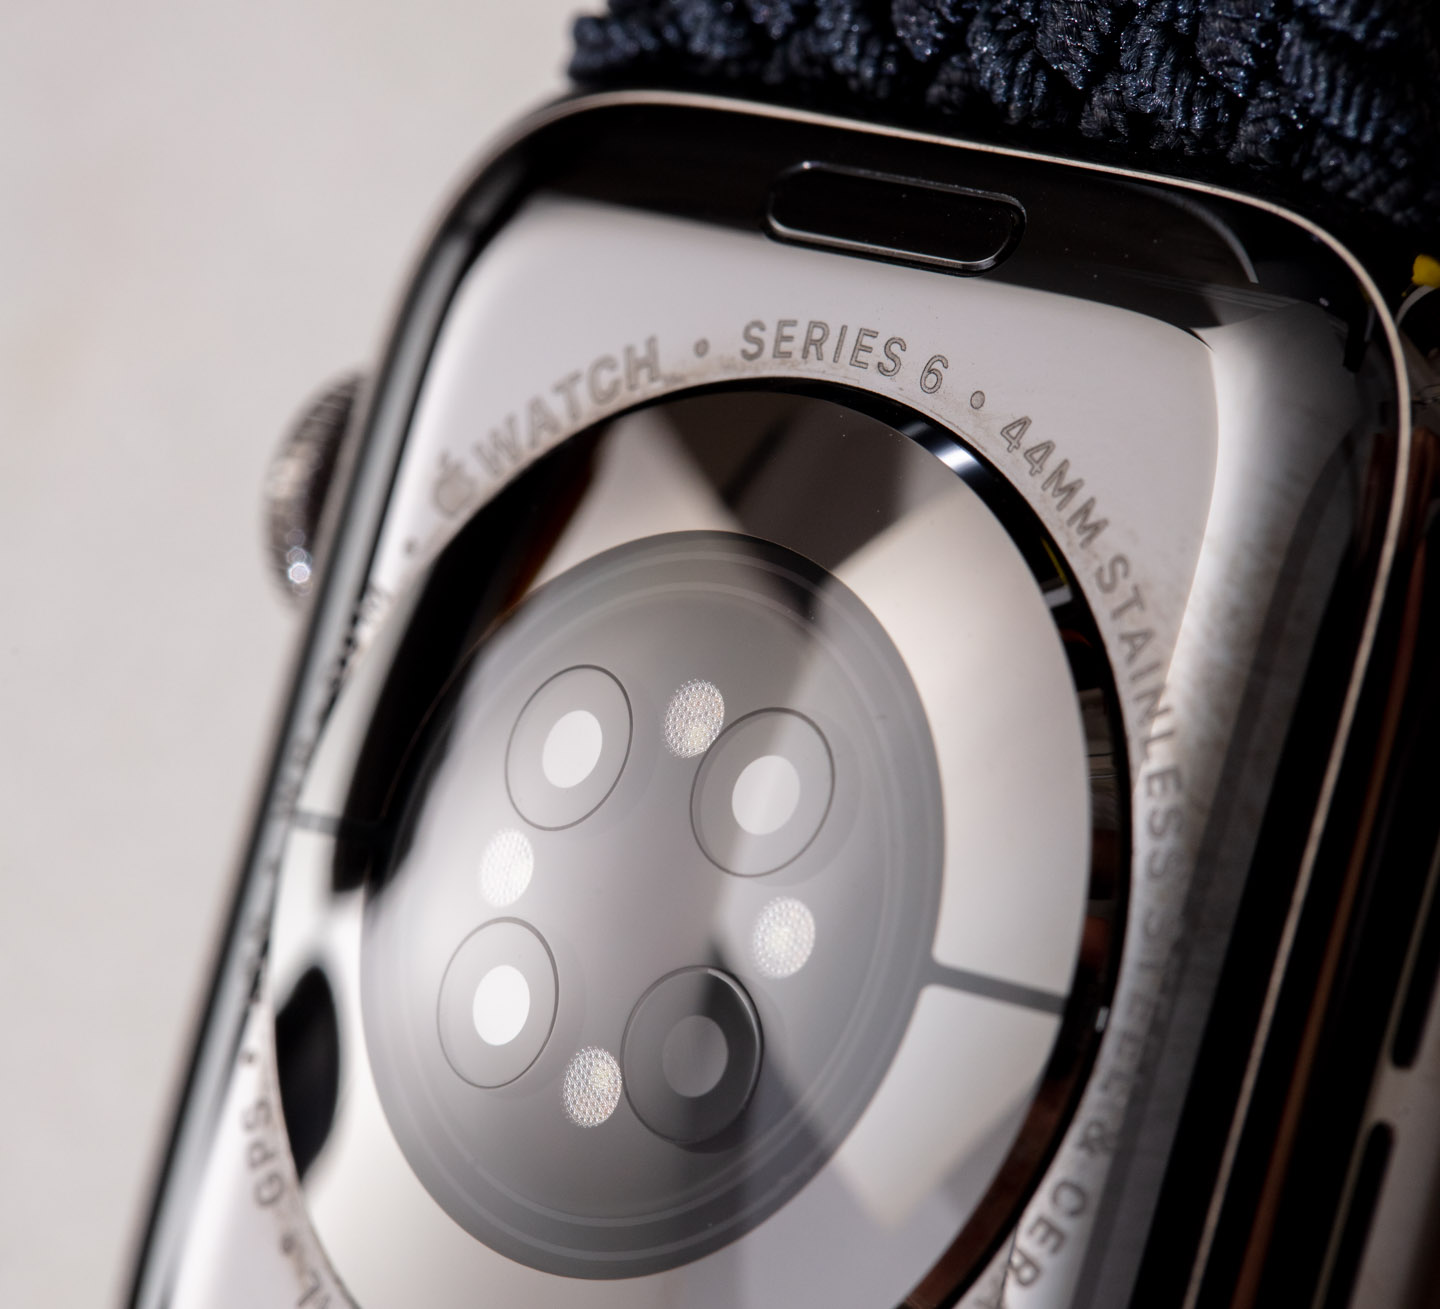 Hands-On With The Apple Watch Series 6 & Apple's 'Wellness Device' Limbo Hands-On 